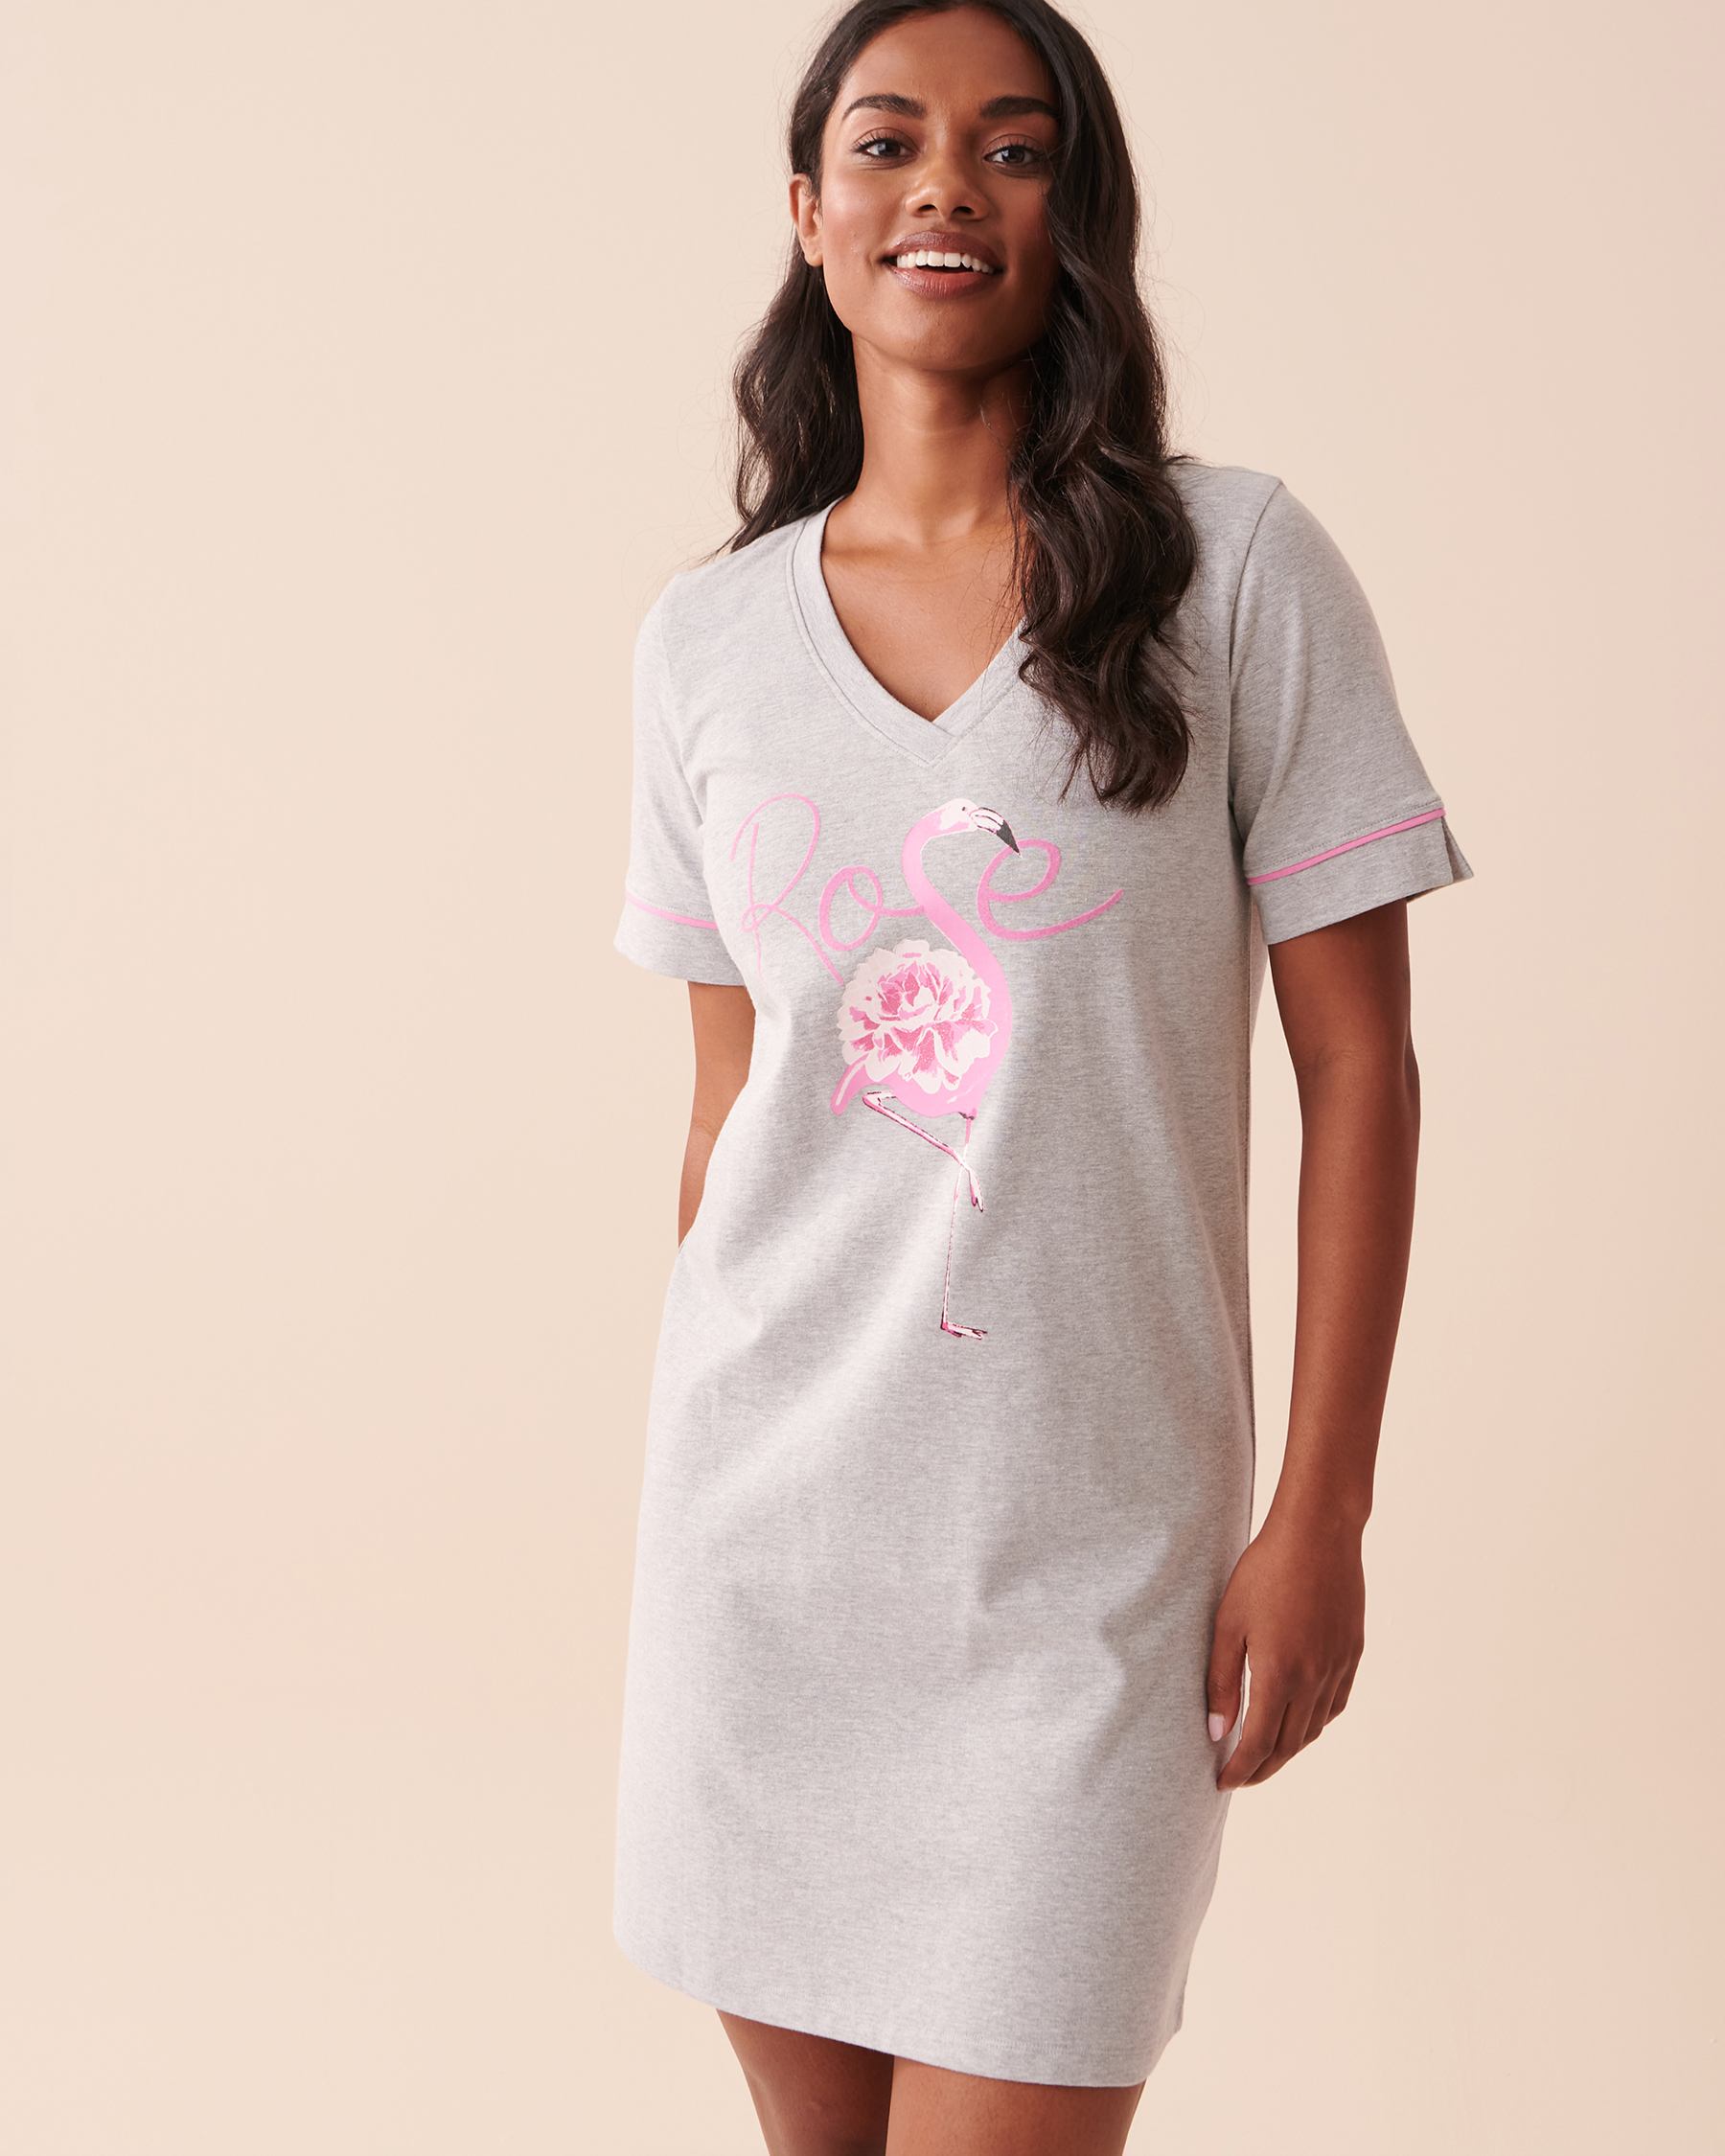 Women's Lace Nightgowns & Nightshirts